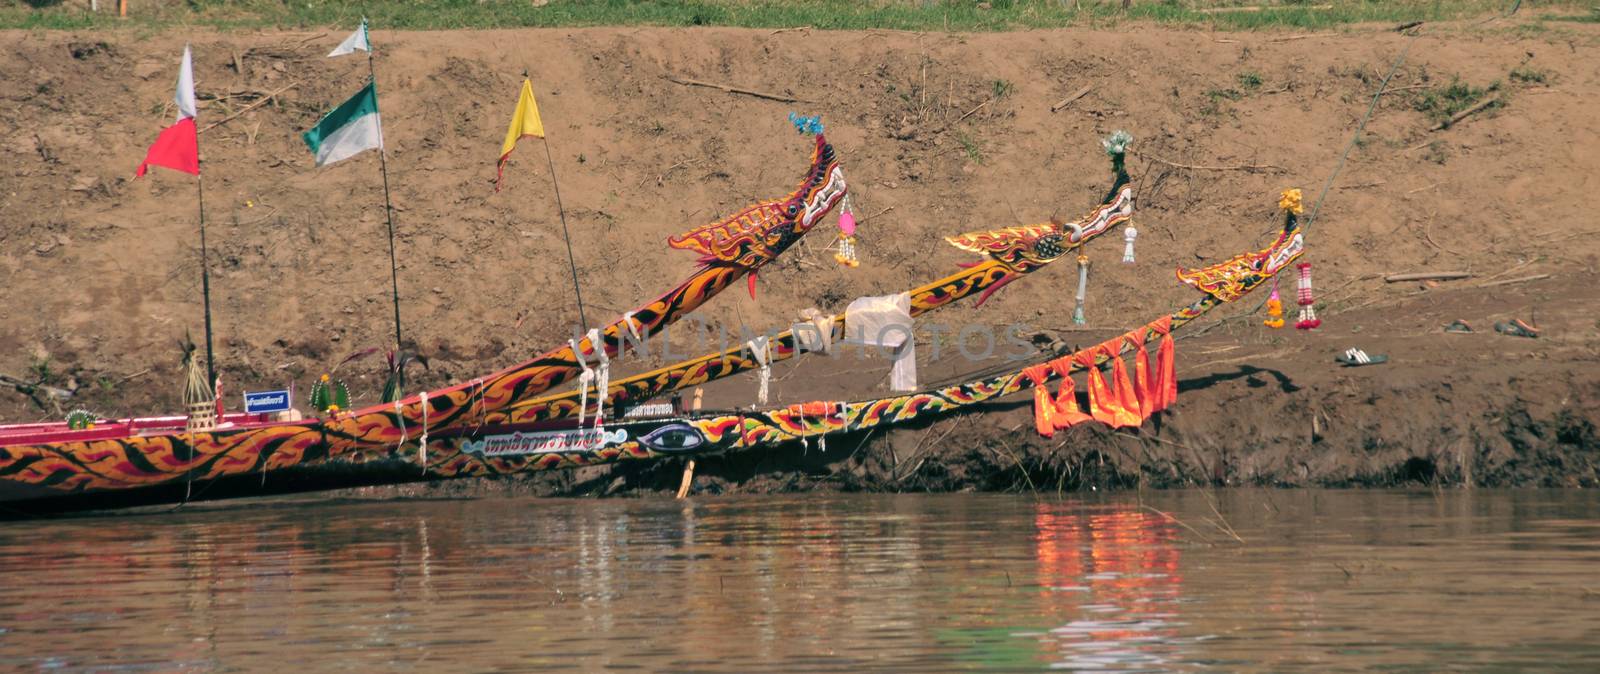 Nan, Thailand – October 27,2019 : King of Nagas long boat racing festival , This event has been the pride of Nan province for generations, The only one in Thailand